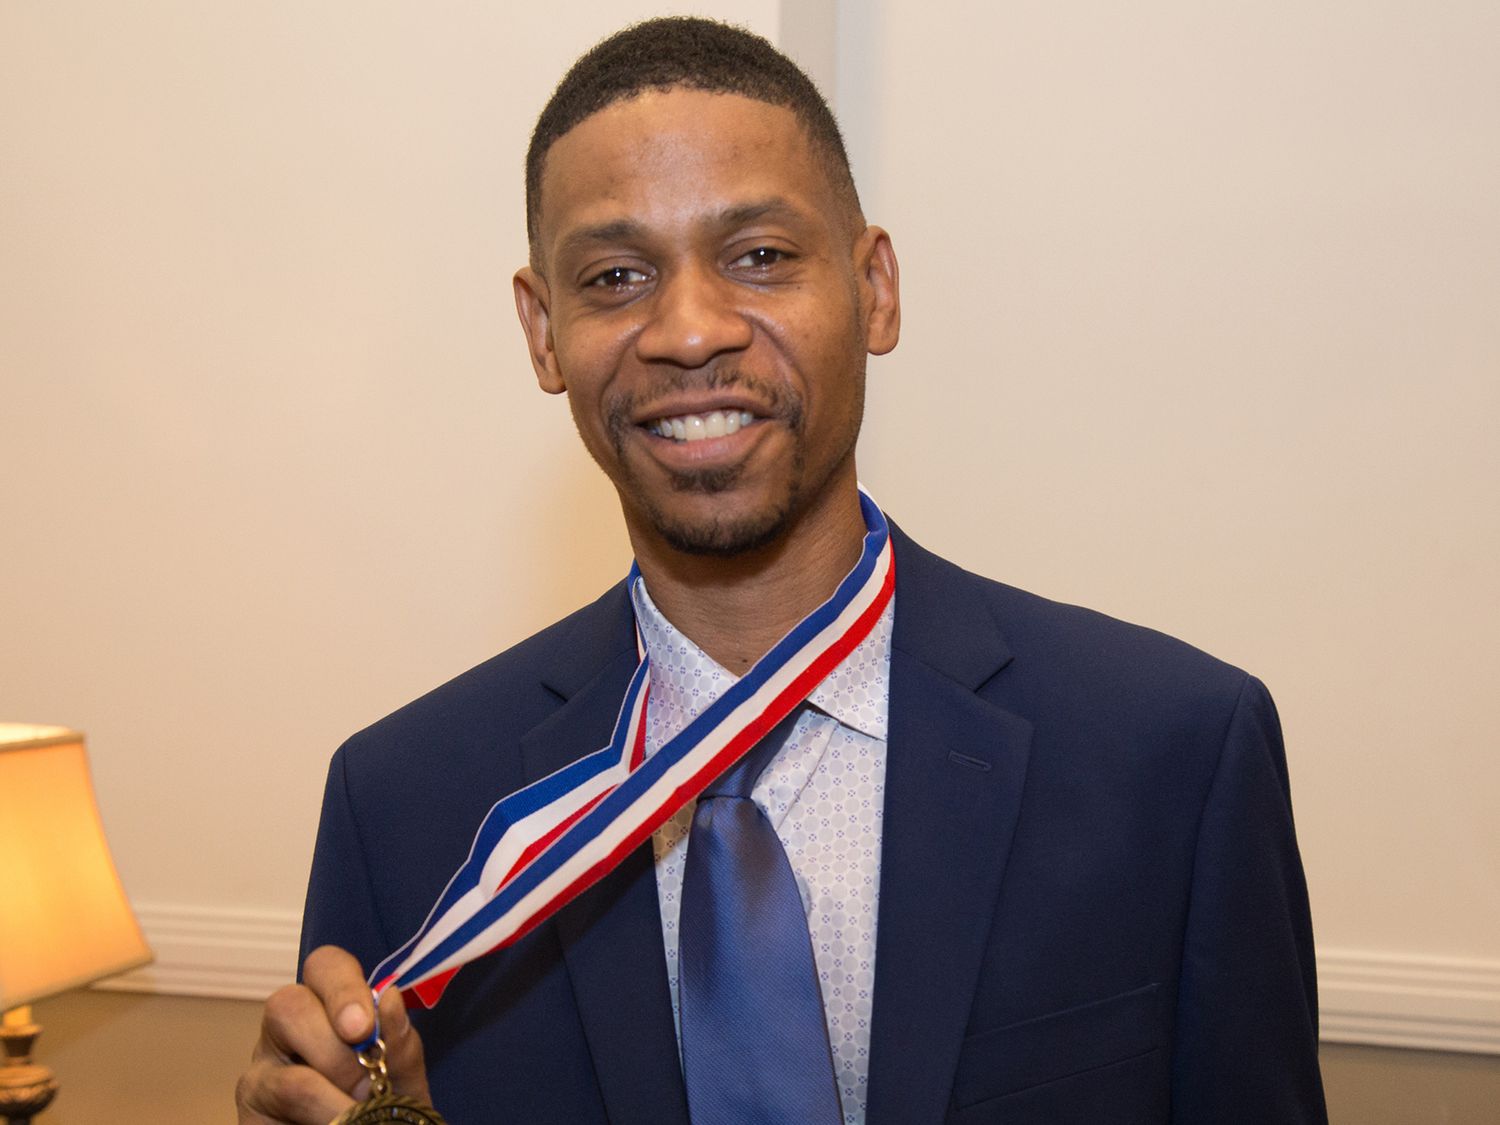 Kecalf Franklin, Son of Aretha Franklin poses with the Legacy Award